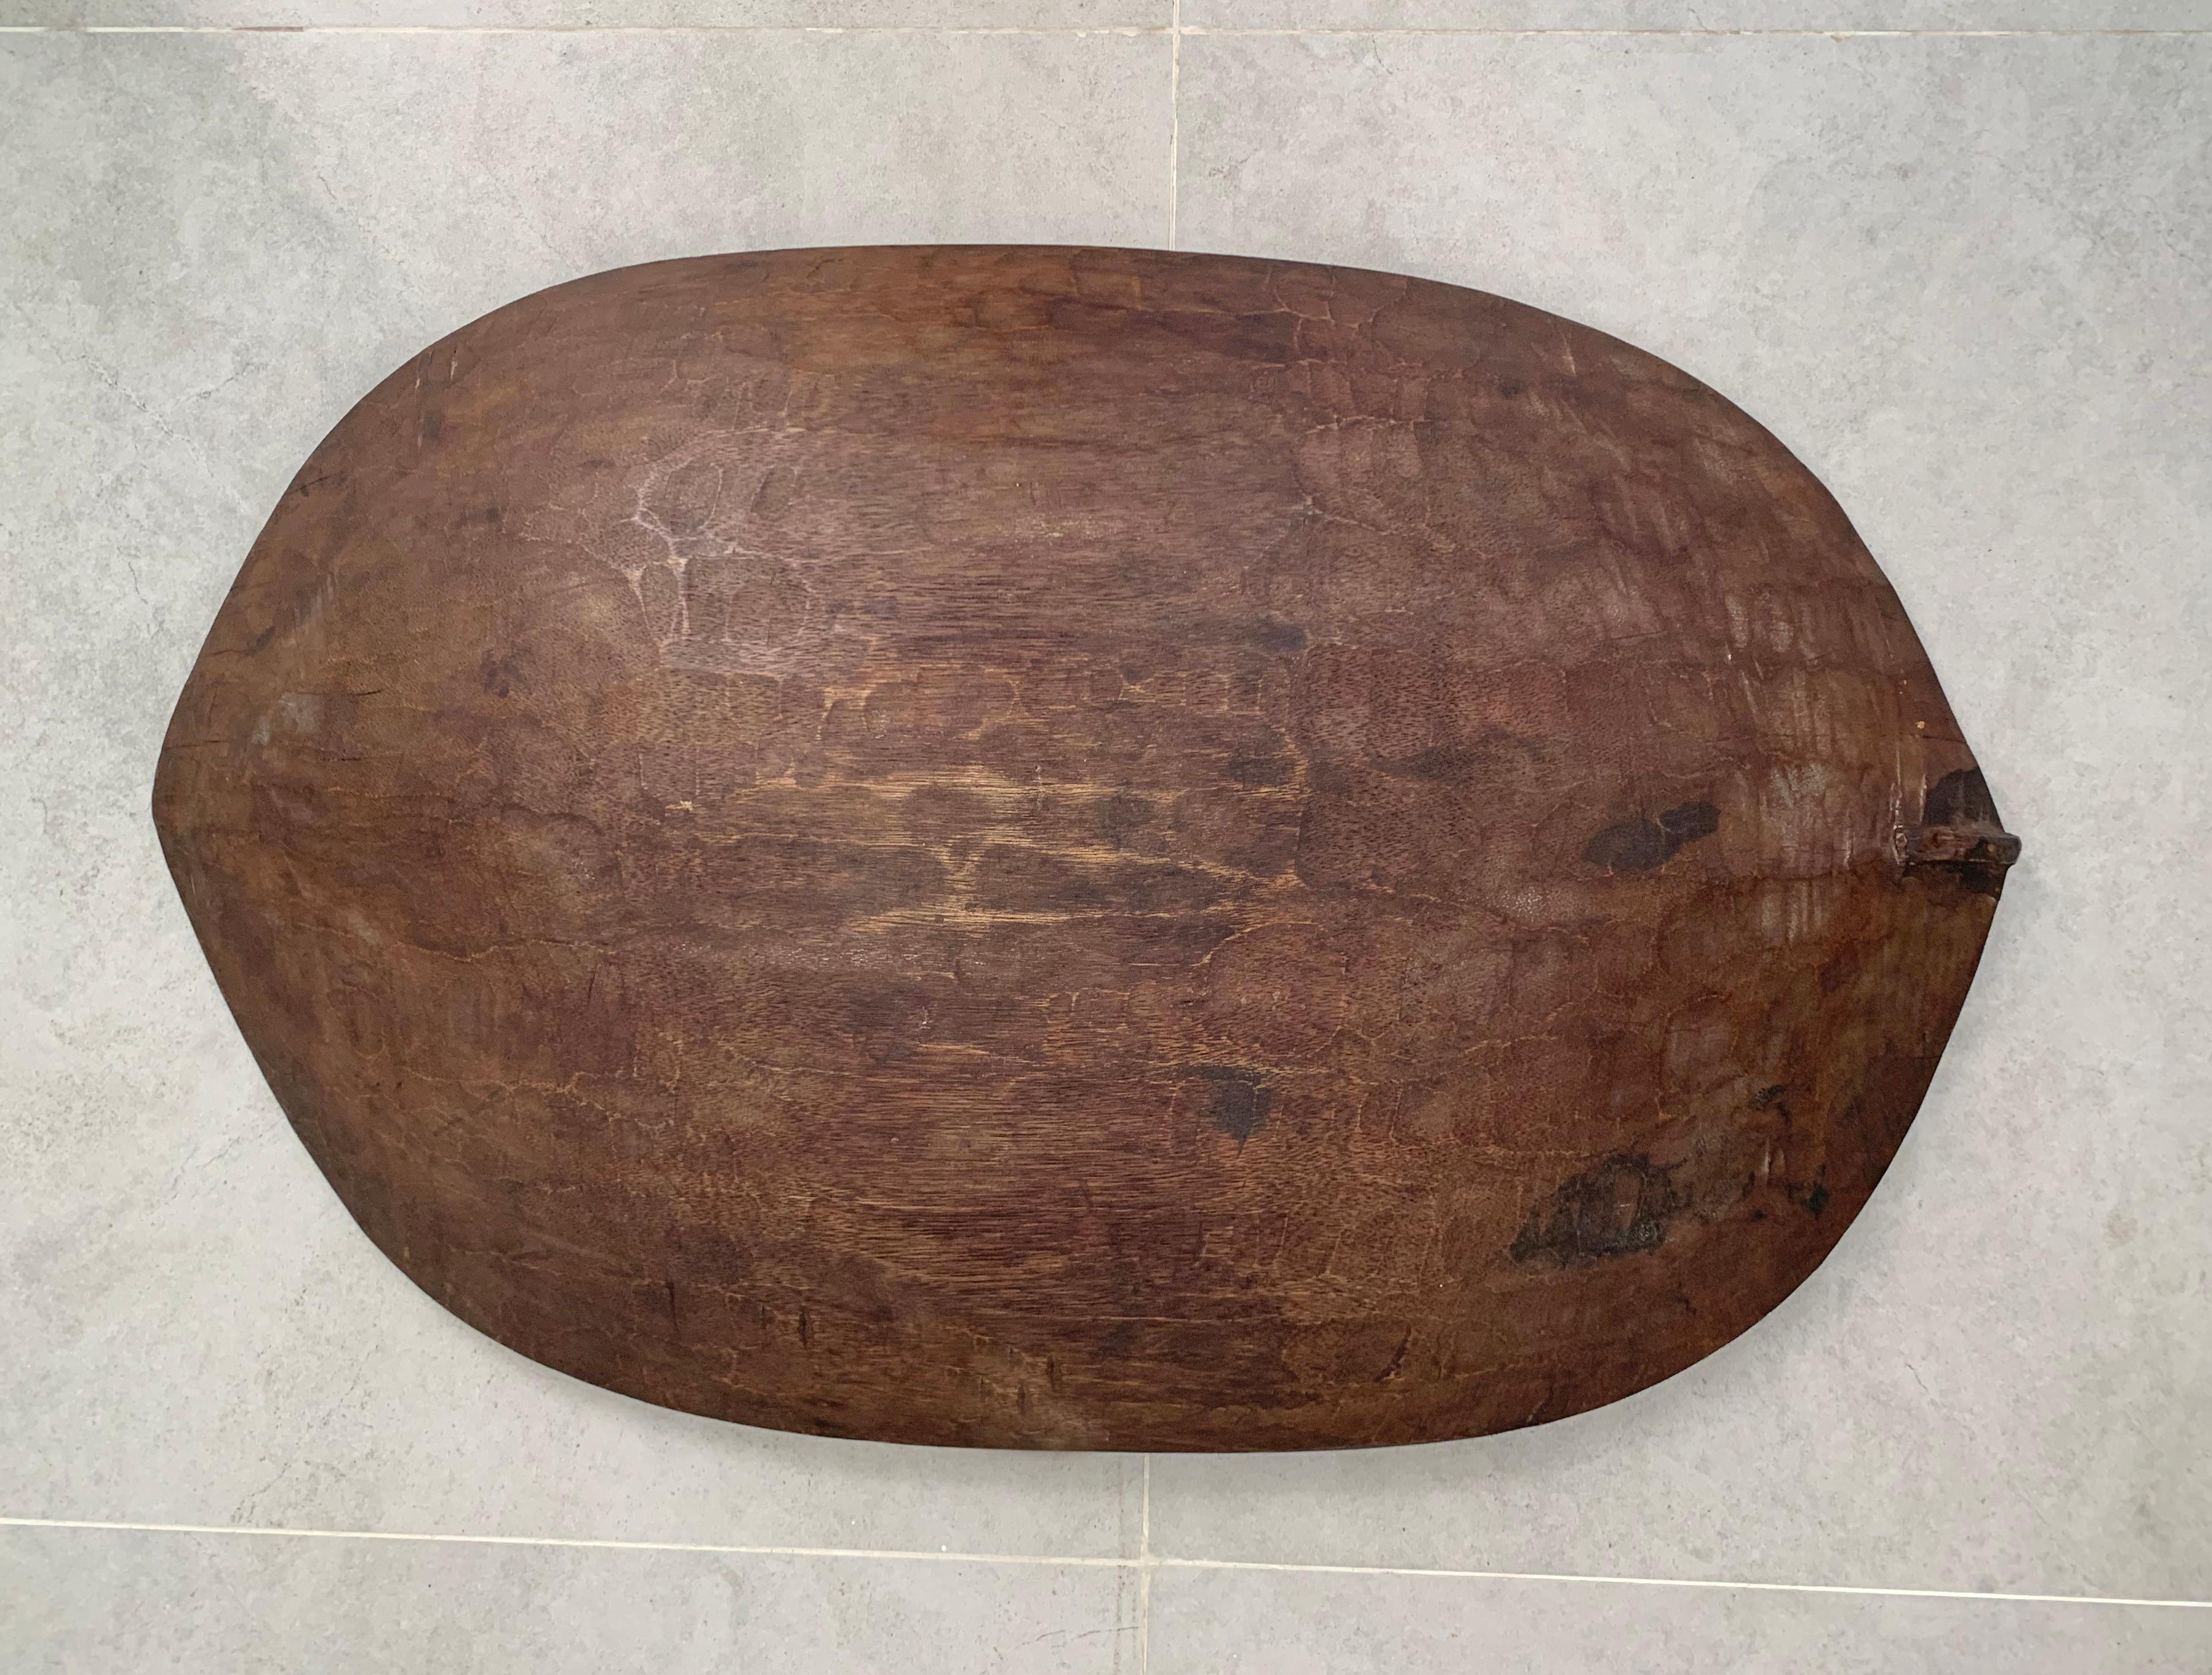 Hand-Carved Wooden Tray / Bowl Mentawai Tribe of Indonesia, Mid-20th Century For Sale 2